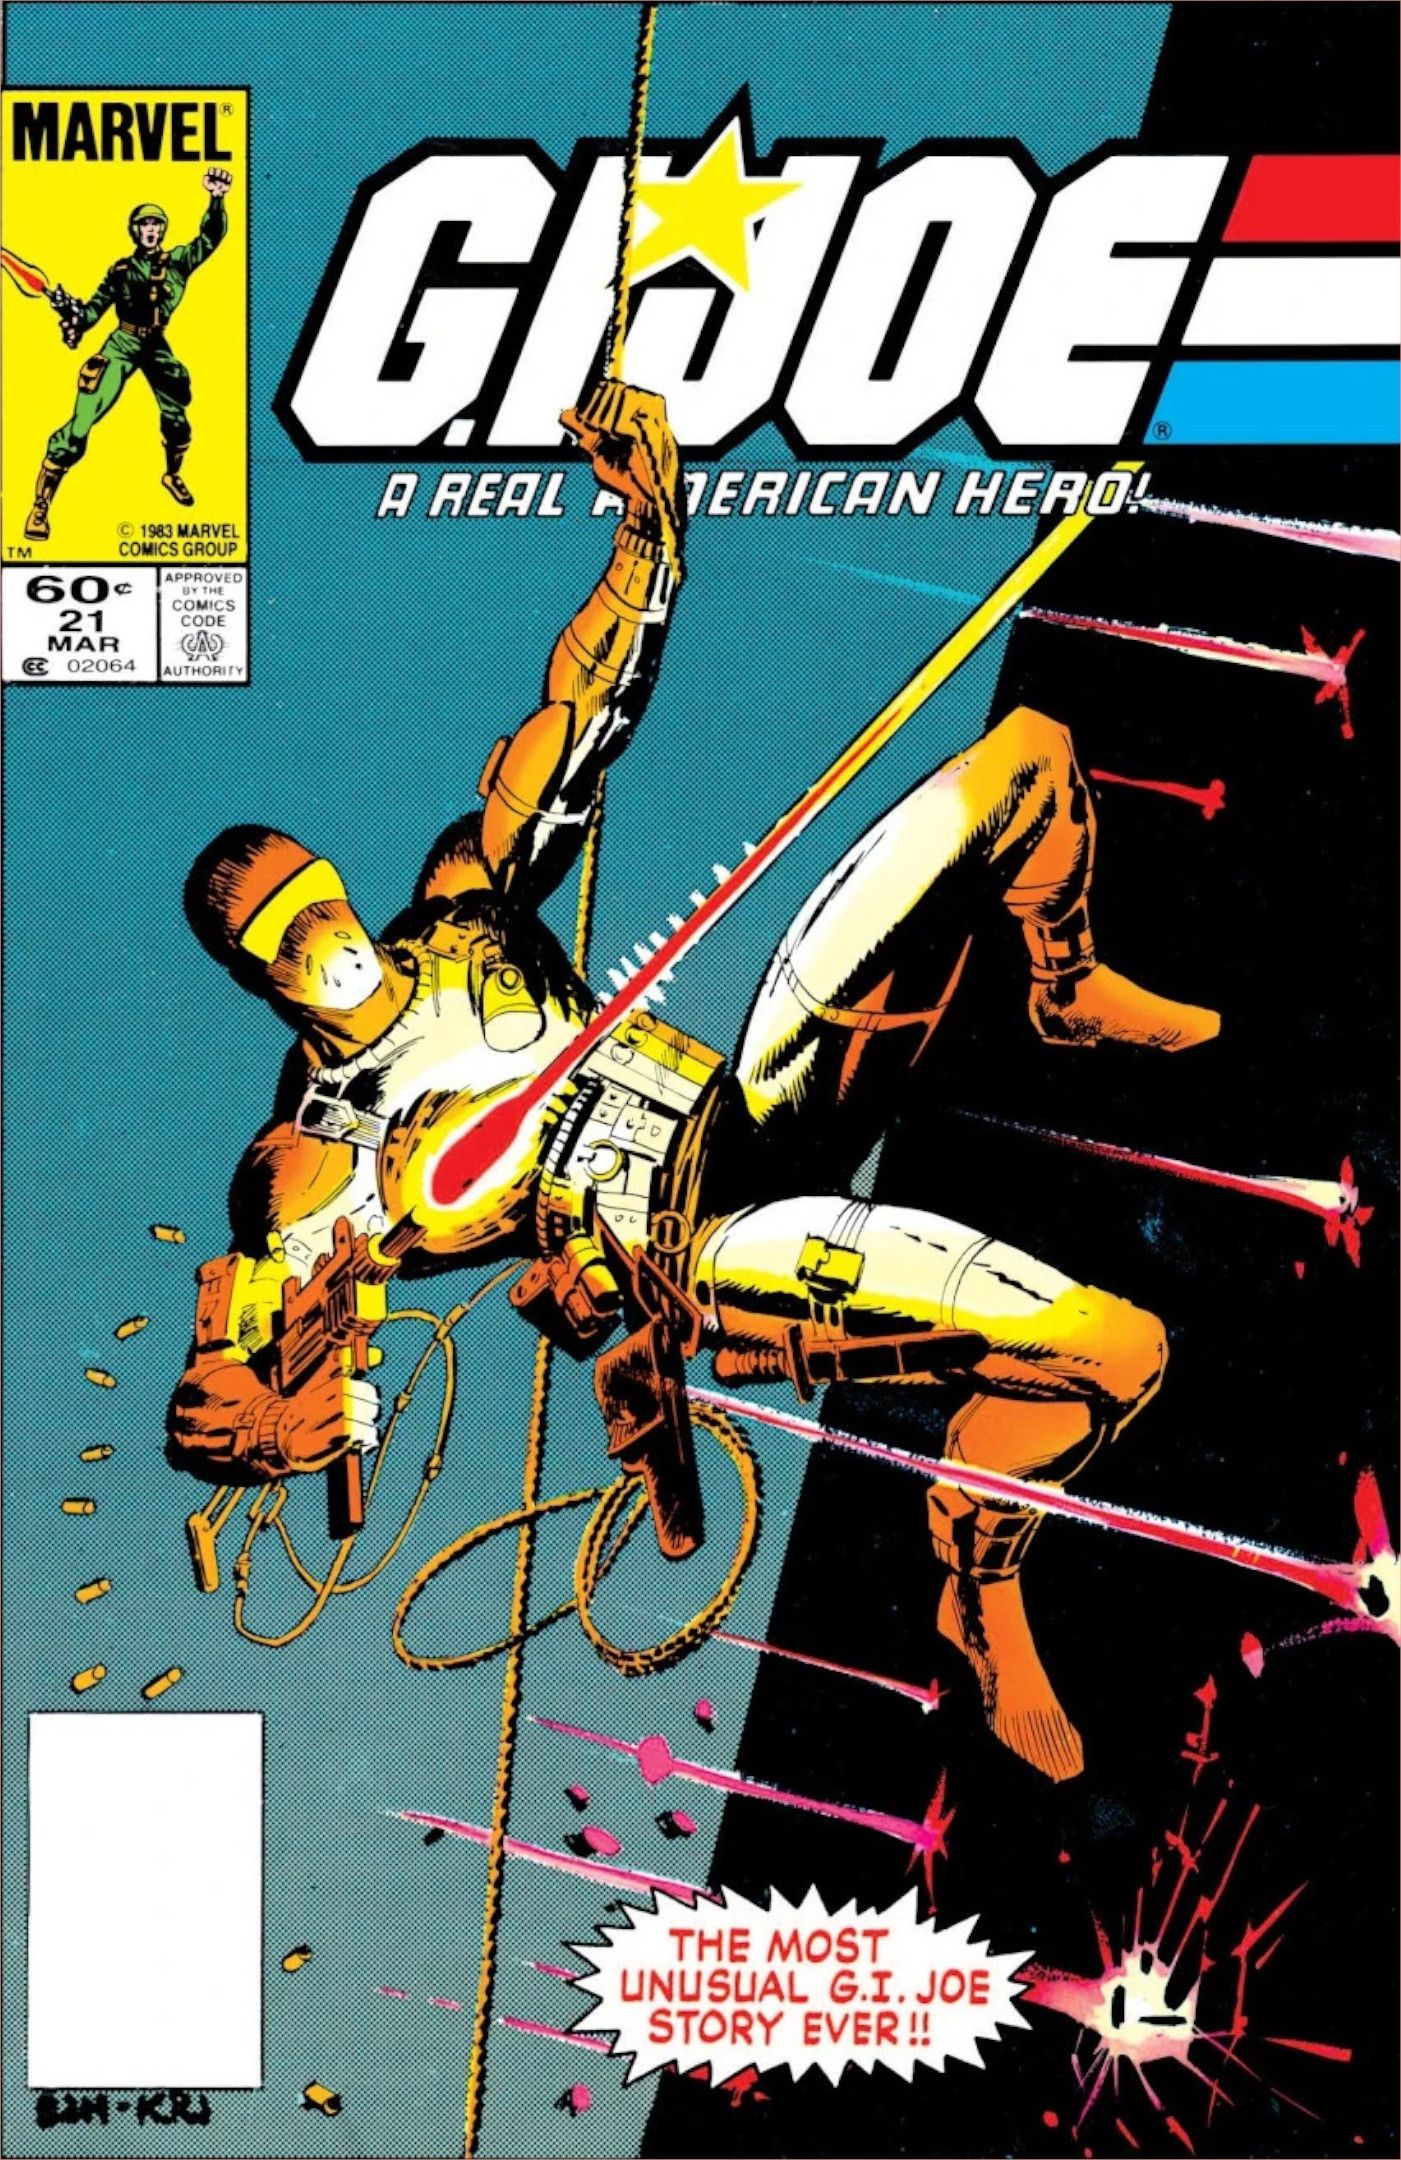 Cover for G.I. Joe: A Real American Hero #21, Snake eyes repelling down the side of a building, firing his gun